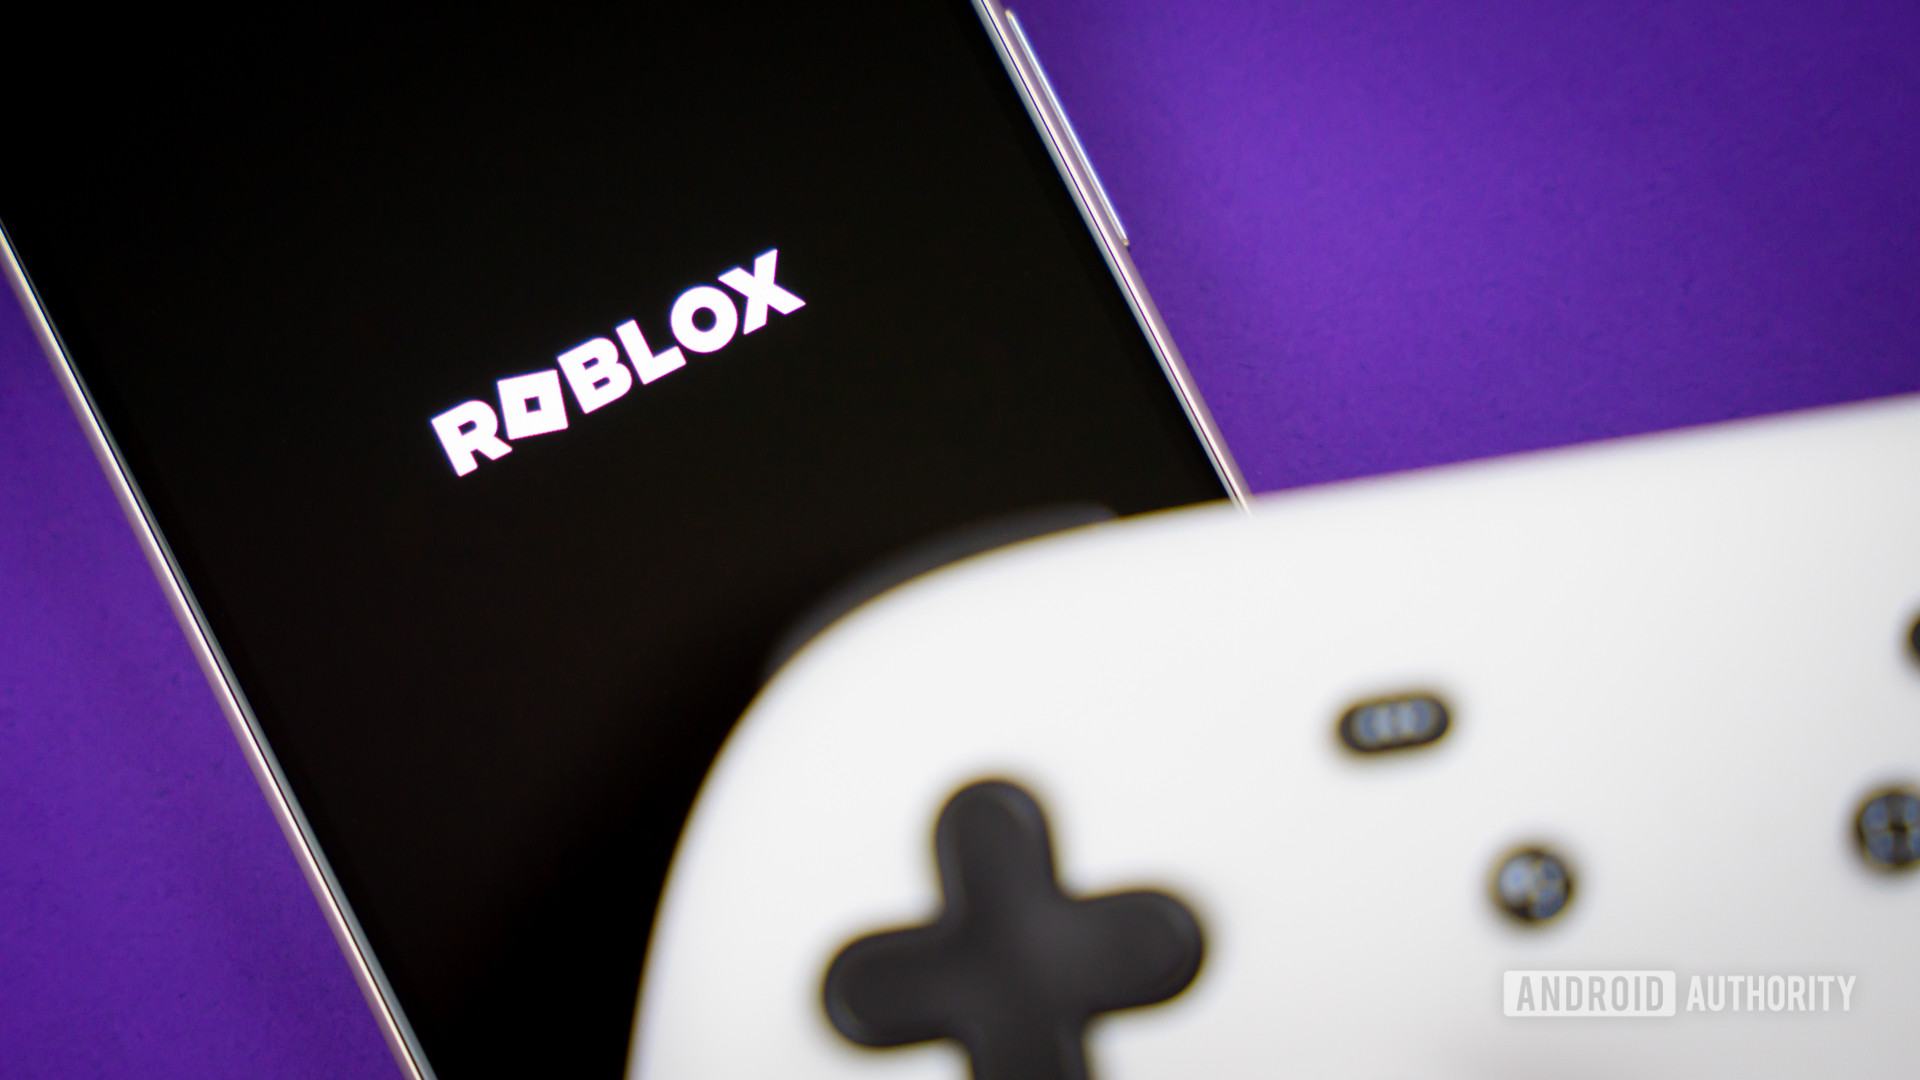 Roblox game logo on smartphone next to controller Stock photo 3